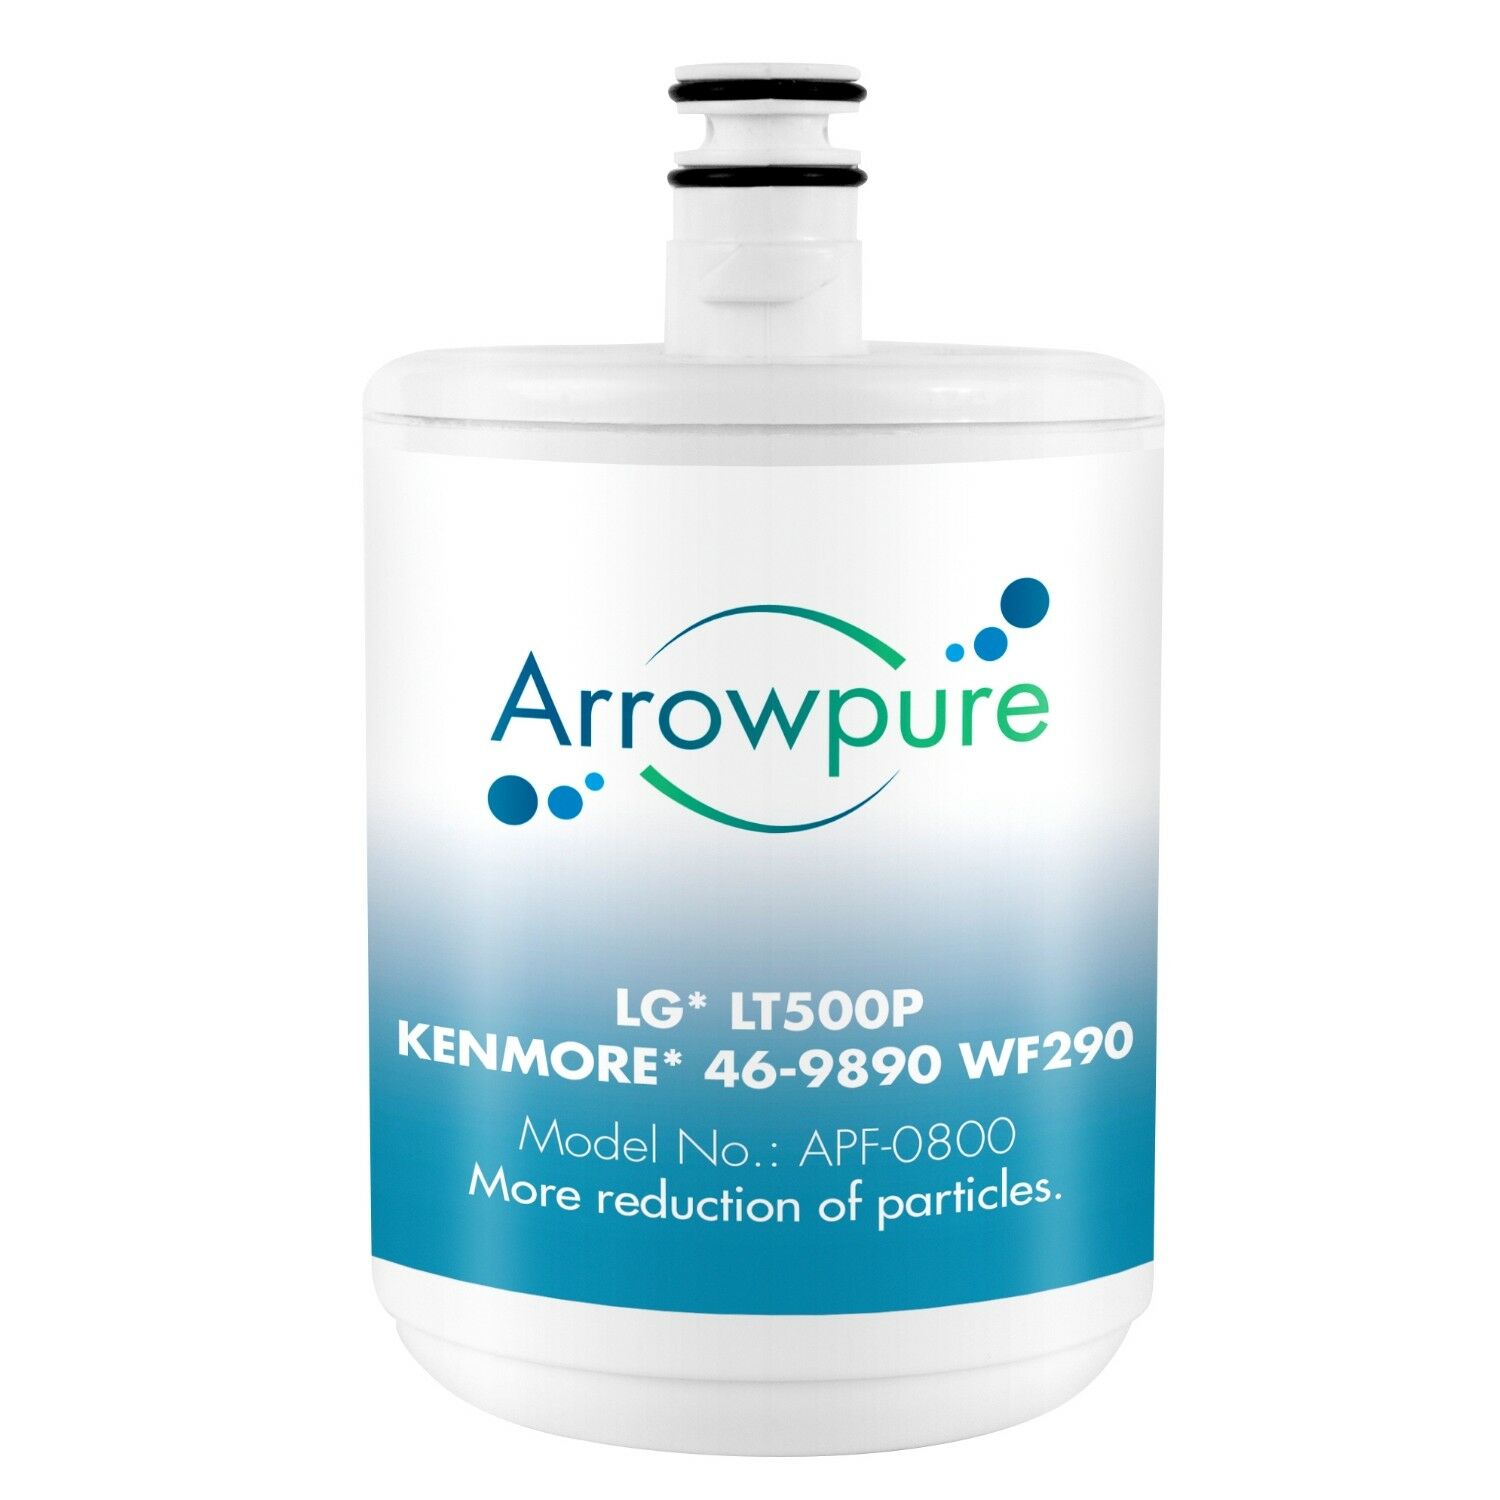 5 Pack Refrigerator Water Filter Replacement by Arrowpure | Certified According to NSF 42&372 | Compatible with LG LT500P, 5231JA2002A, ADQ72910907, ADQ72910901, Kenmore 9890, 46-9890, 46989 - image 2 of 4